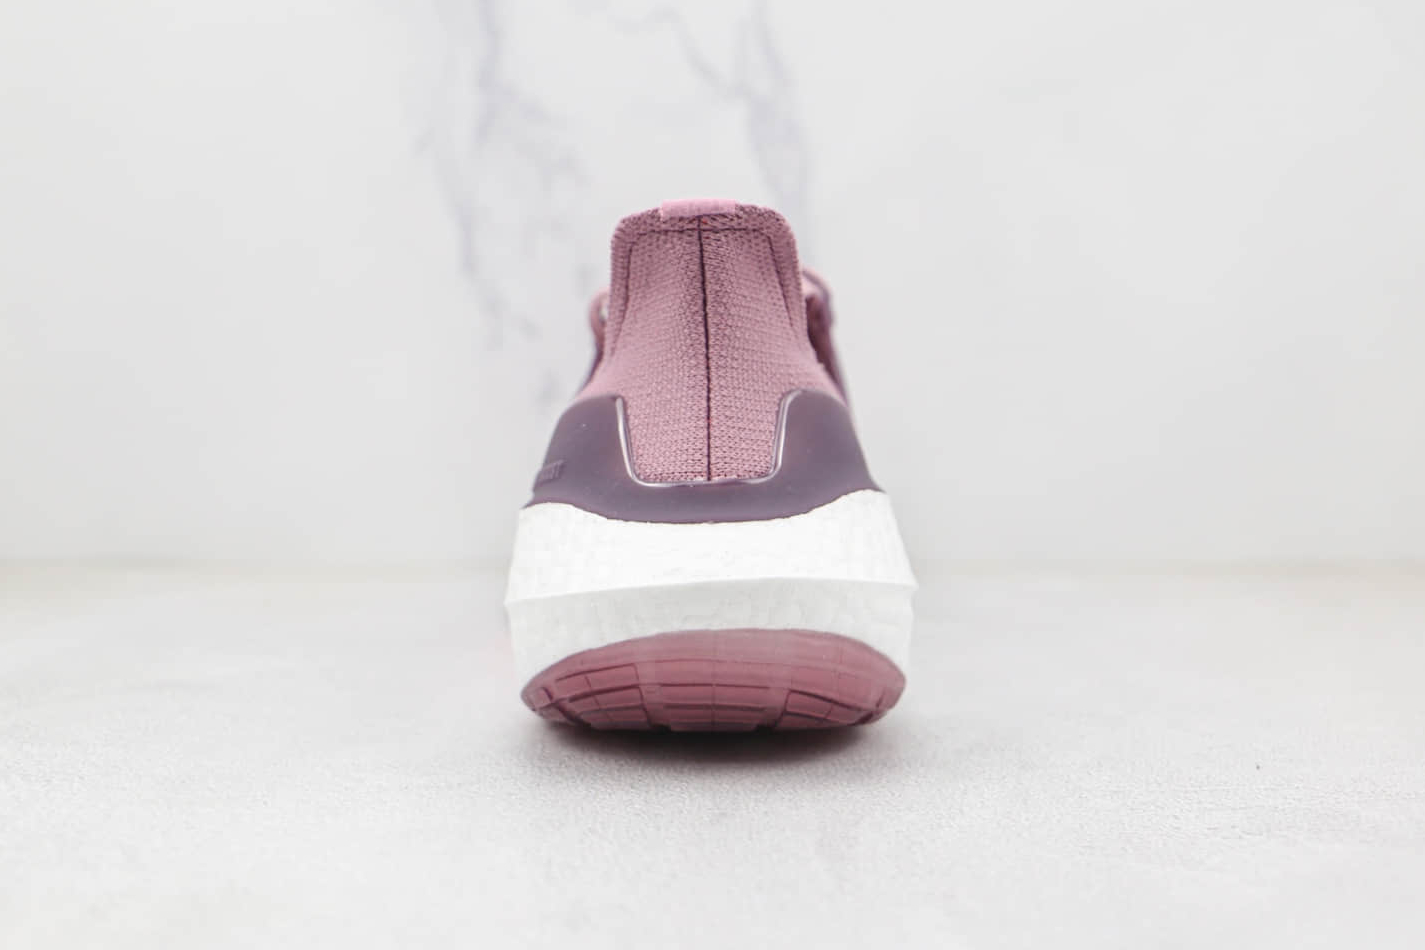 Adidas UltraBoost 22 'Magic Mauve' GX5588 - The Ultimate Running Shoe for Enhanced Performance!